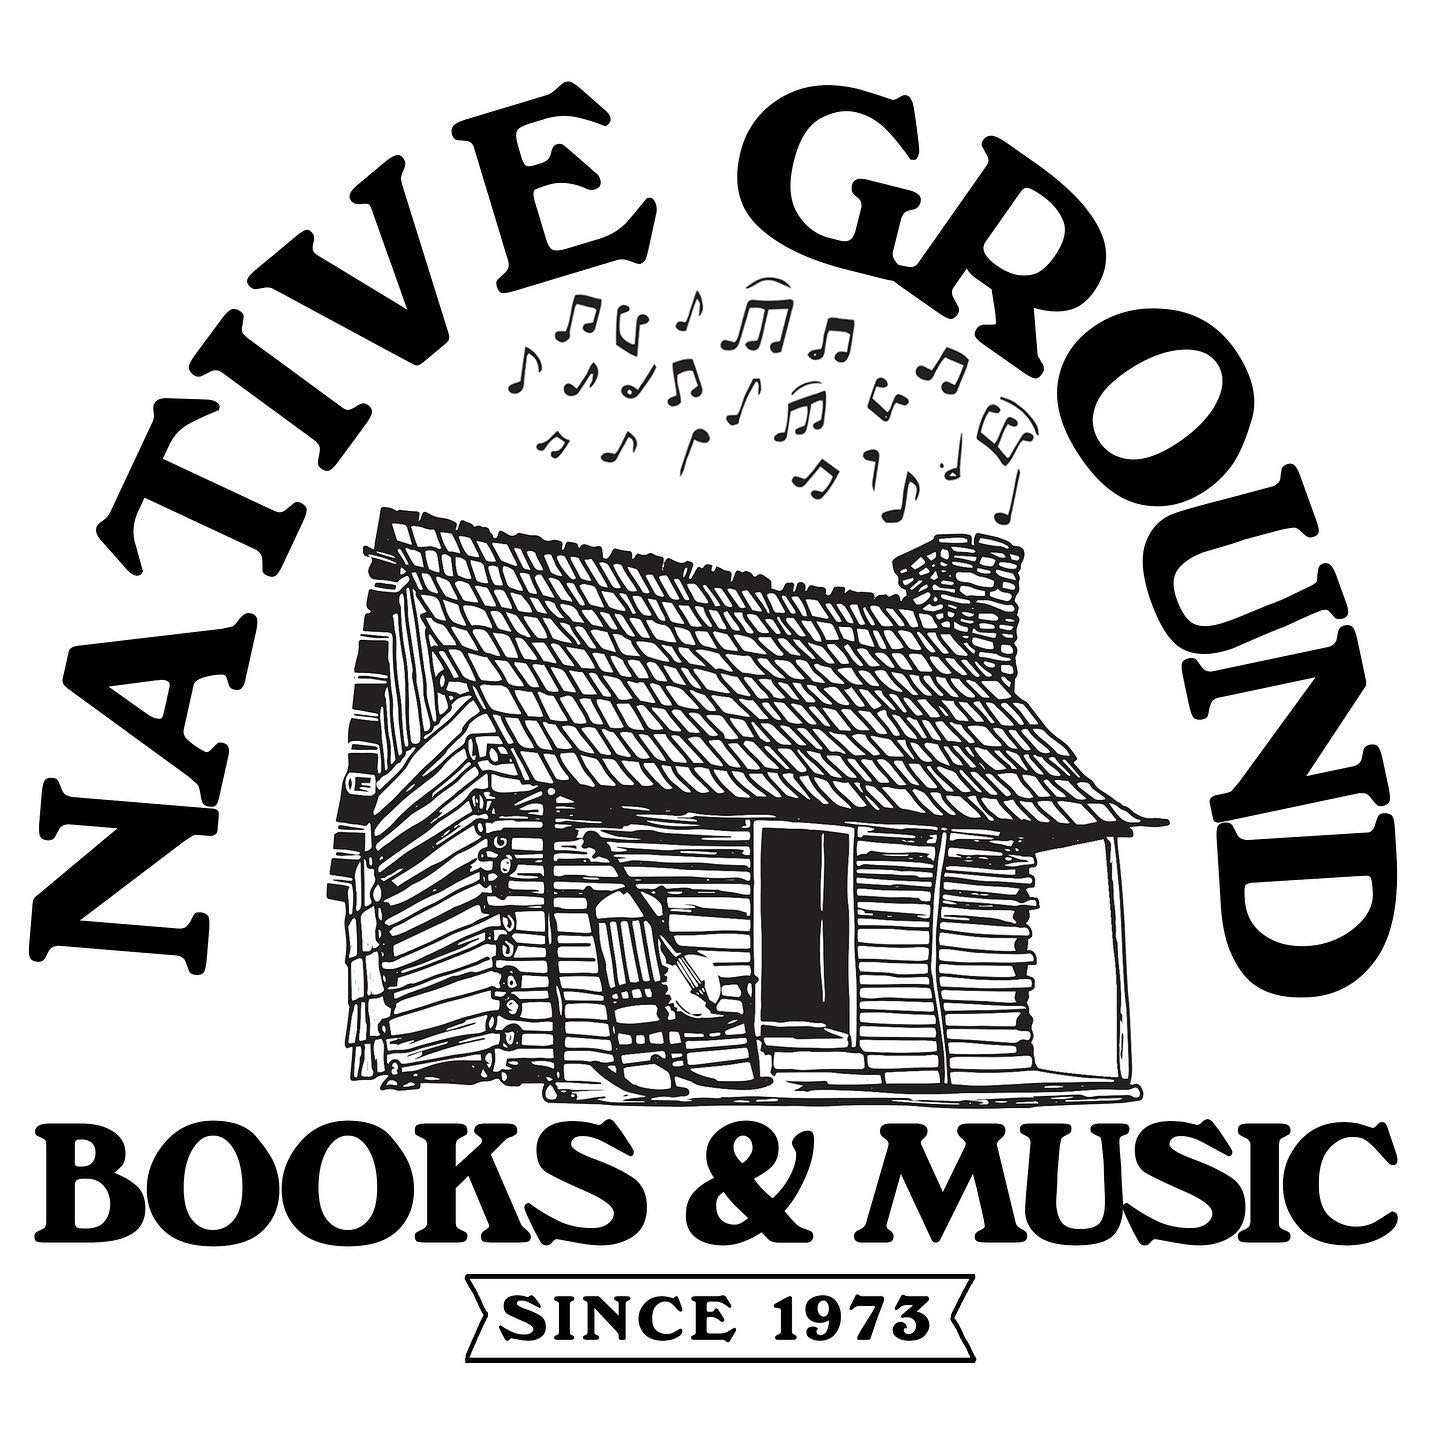 Merry Christmas to you and yours from the Native Ground Family!